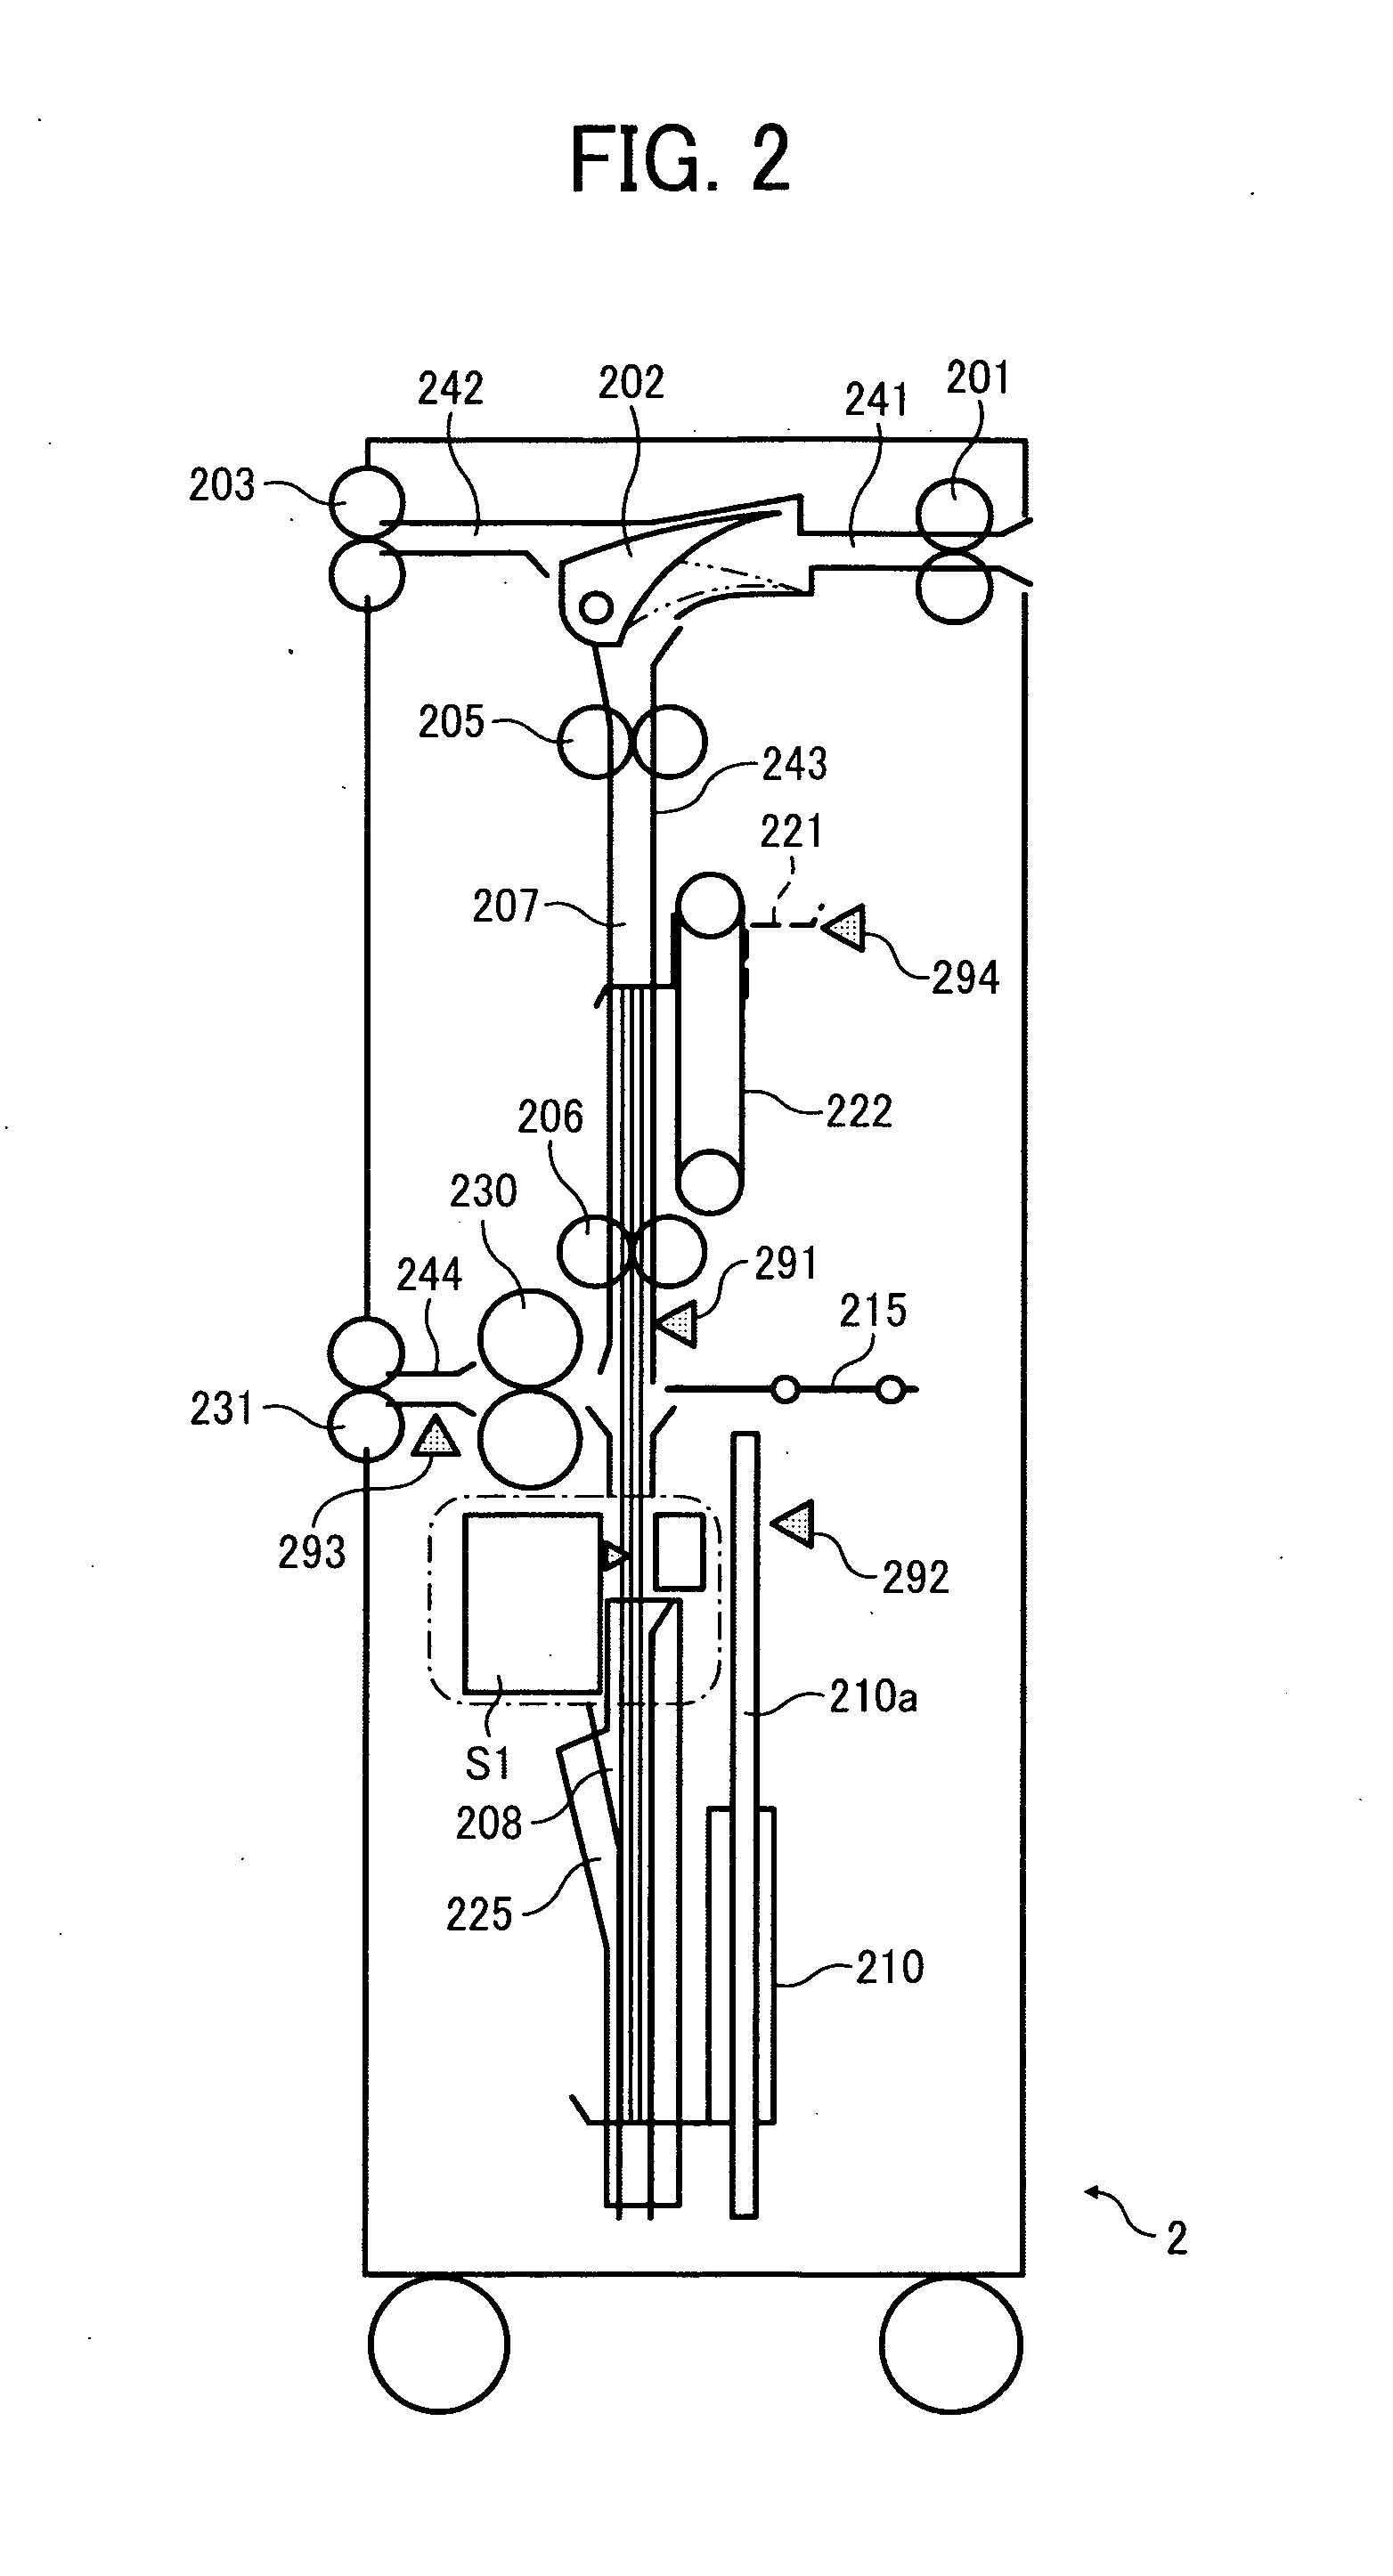 Spine formation device, bookbinding system, and spine formation method